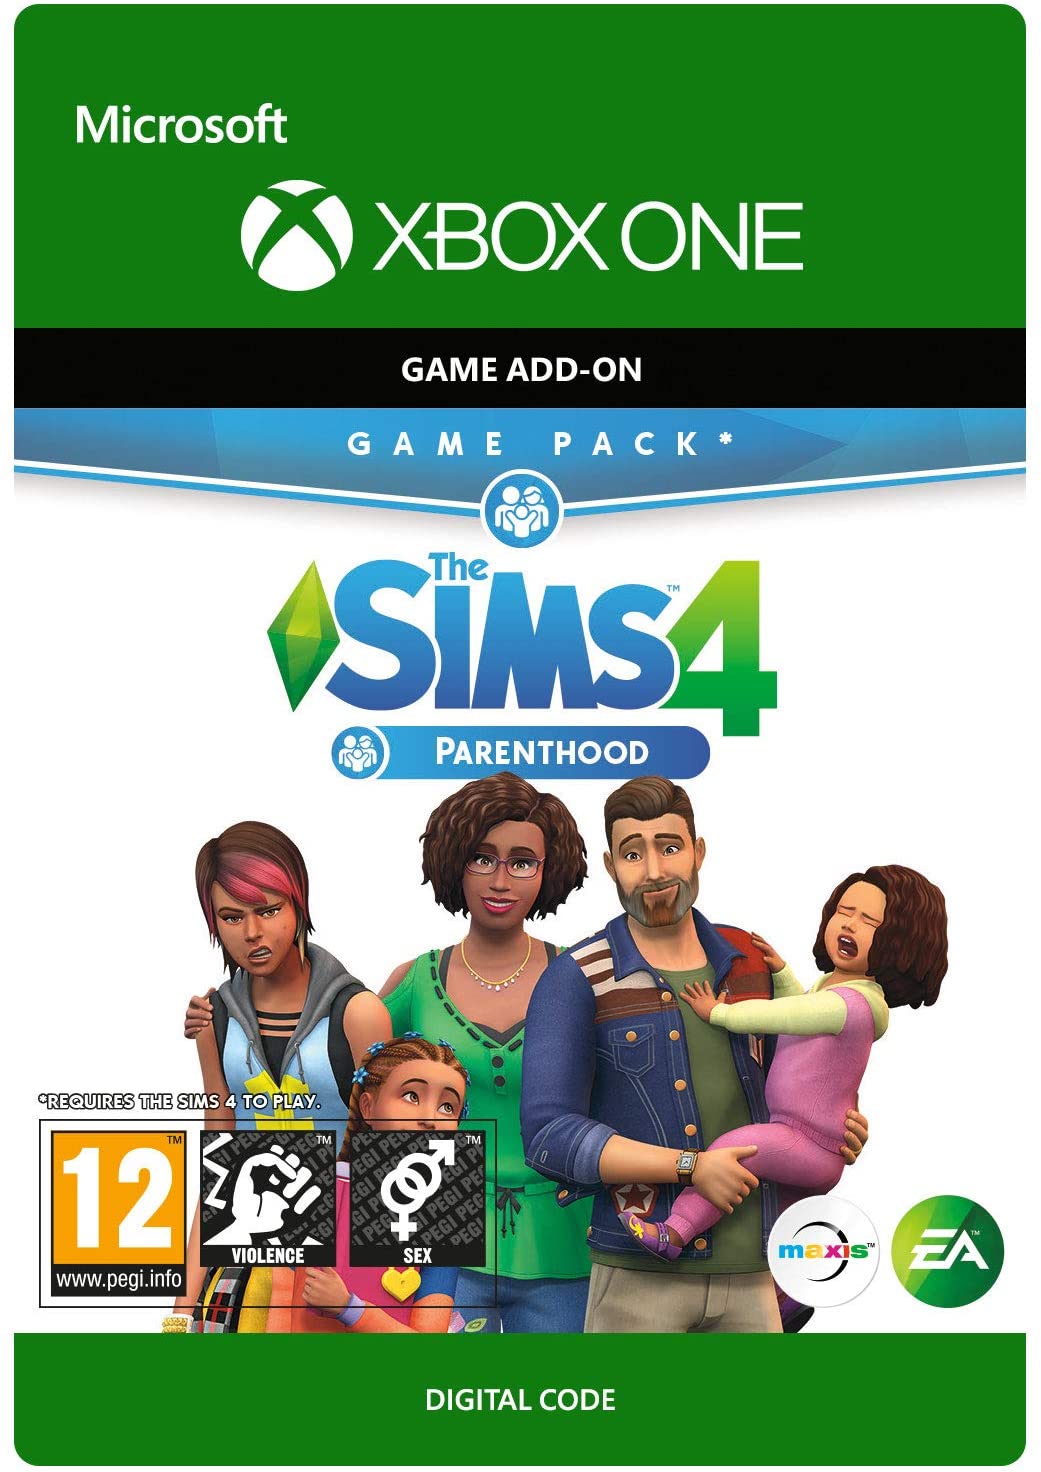 The Sims 4 Parenthood Digital Download Key (Xbox One): USA